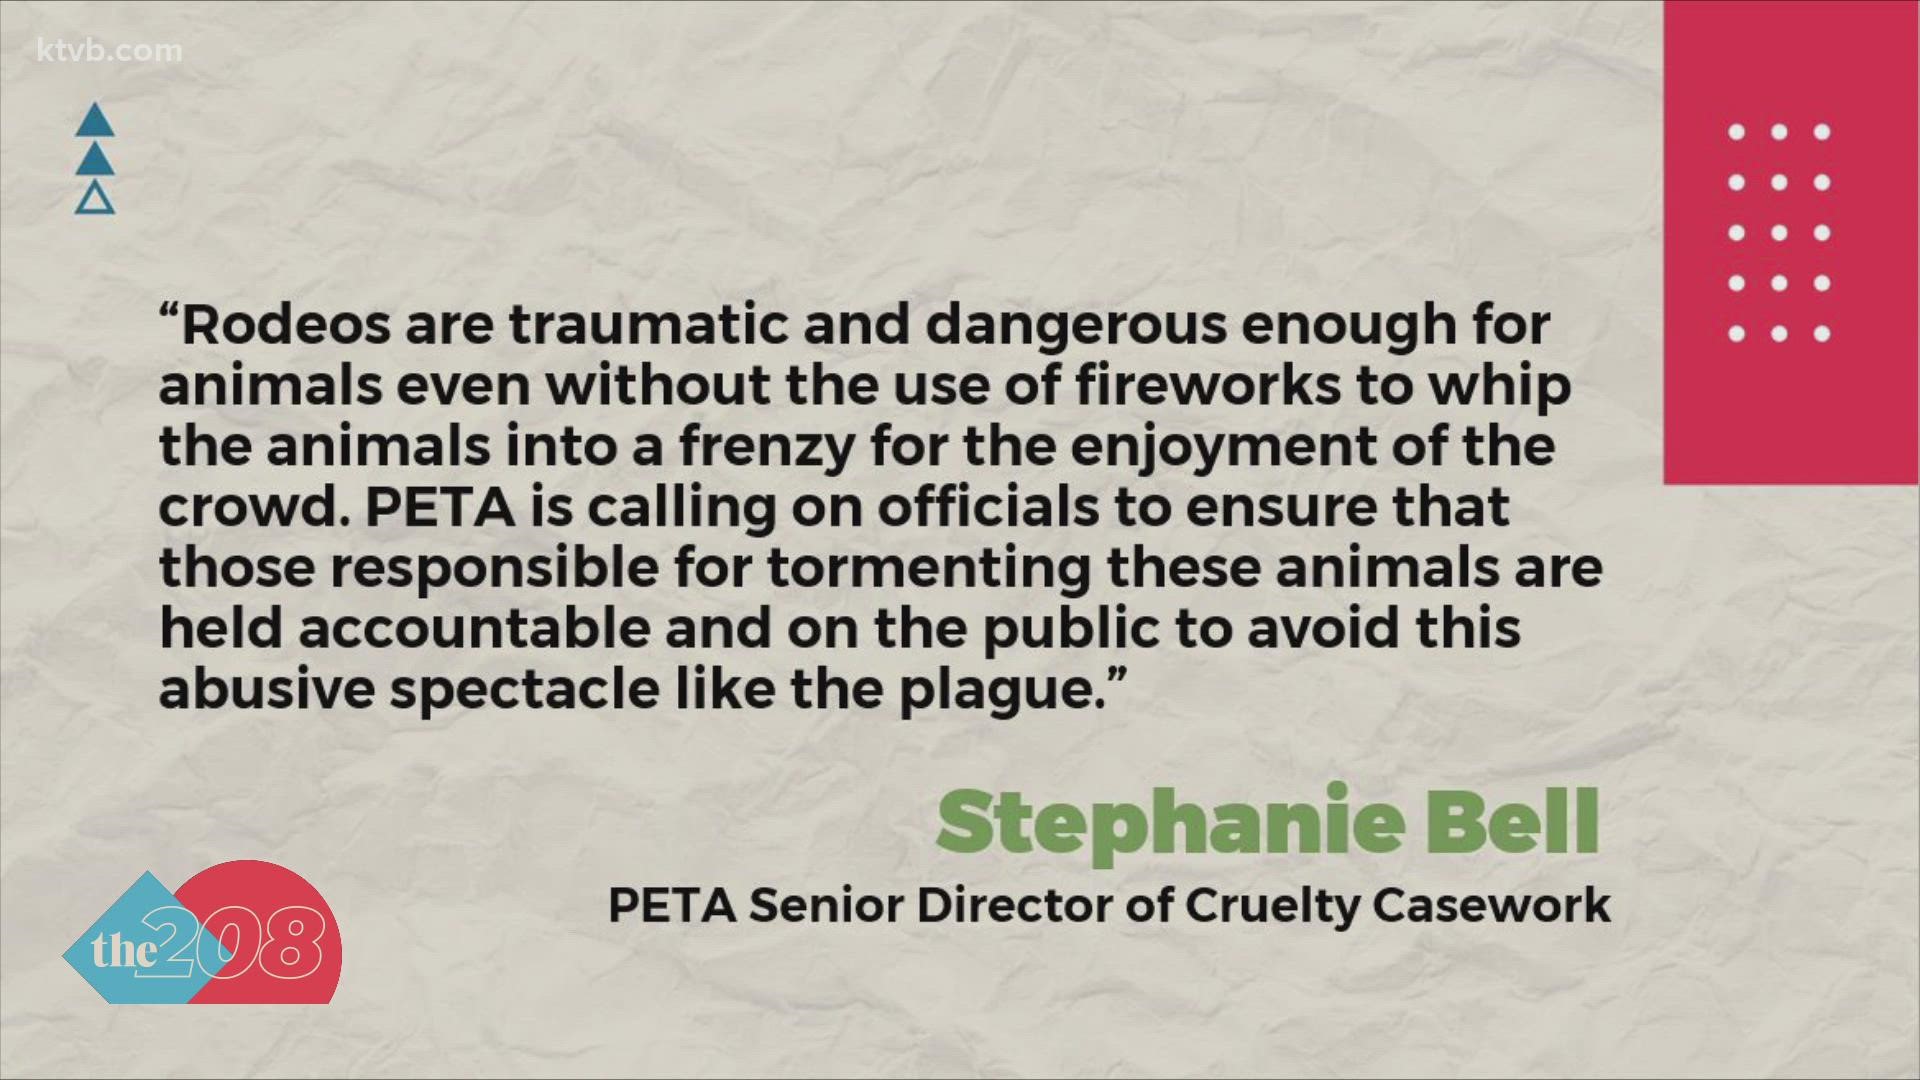 "Rodeos are traumatic and dangerous enough for animals even without the use of fireworks to whip the animals into a frenzy for the enjoyment of the crowd."